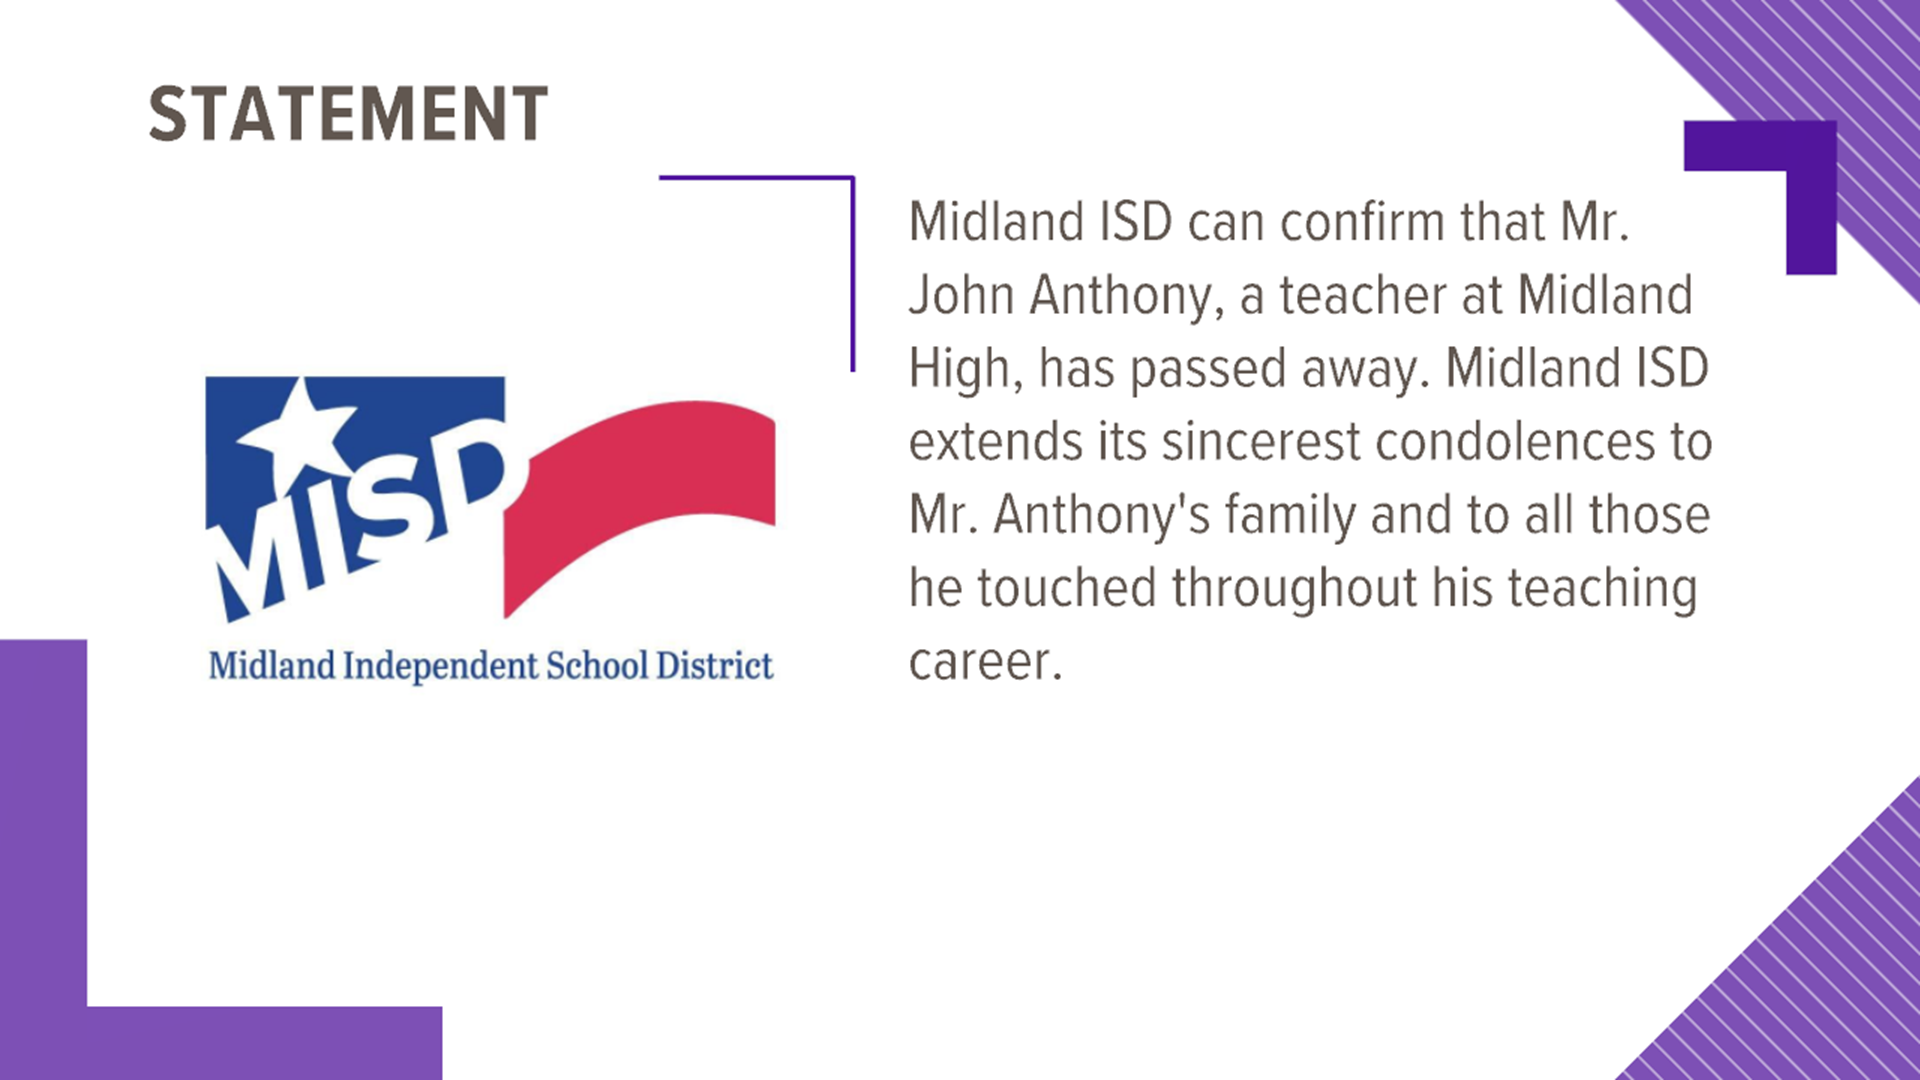 According to the district, was a teacher at Midland High School.